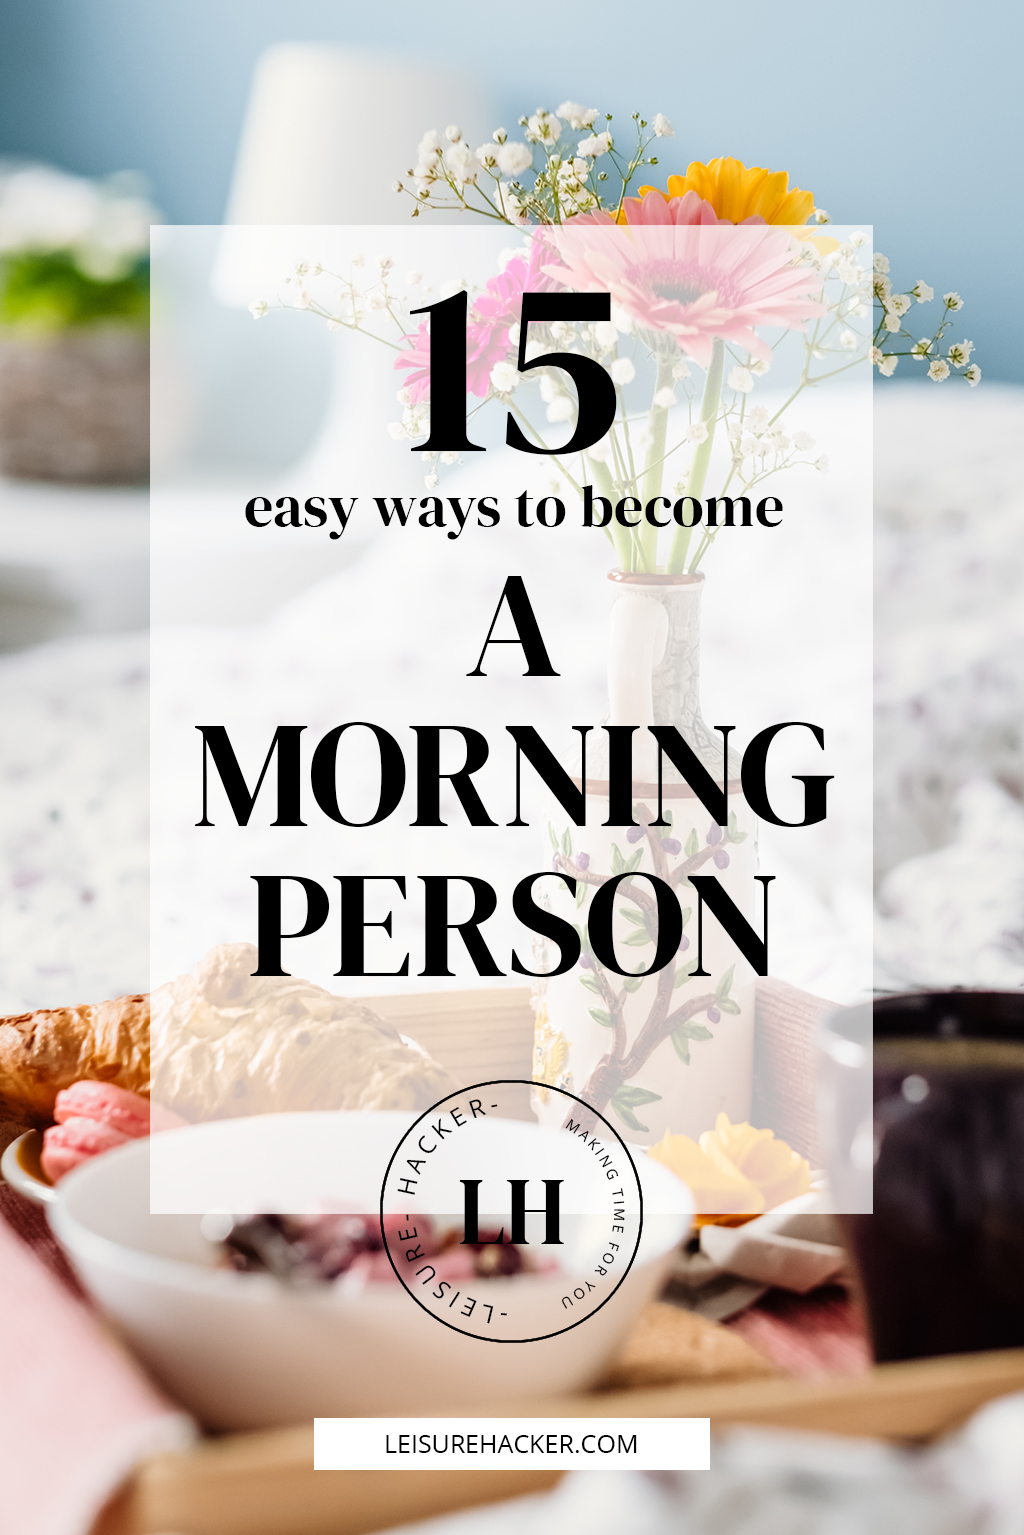 15 easy ways to become a morning person